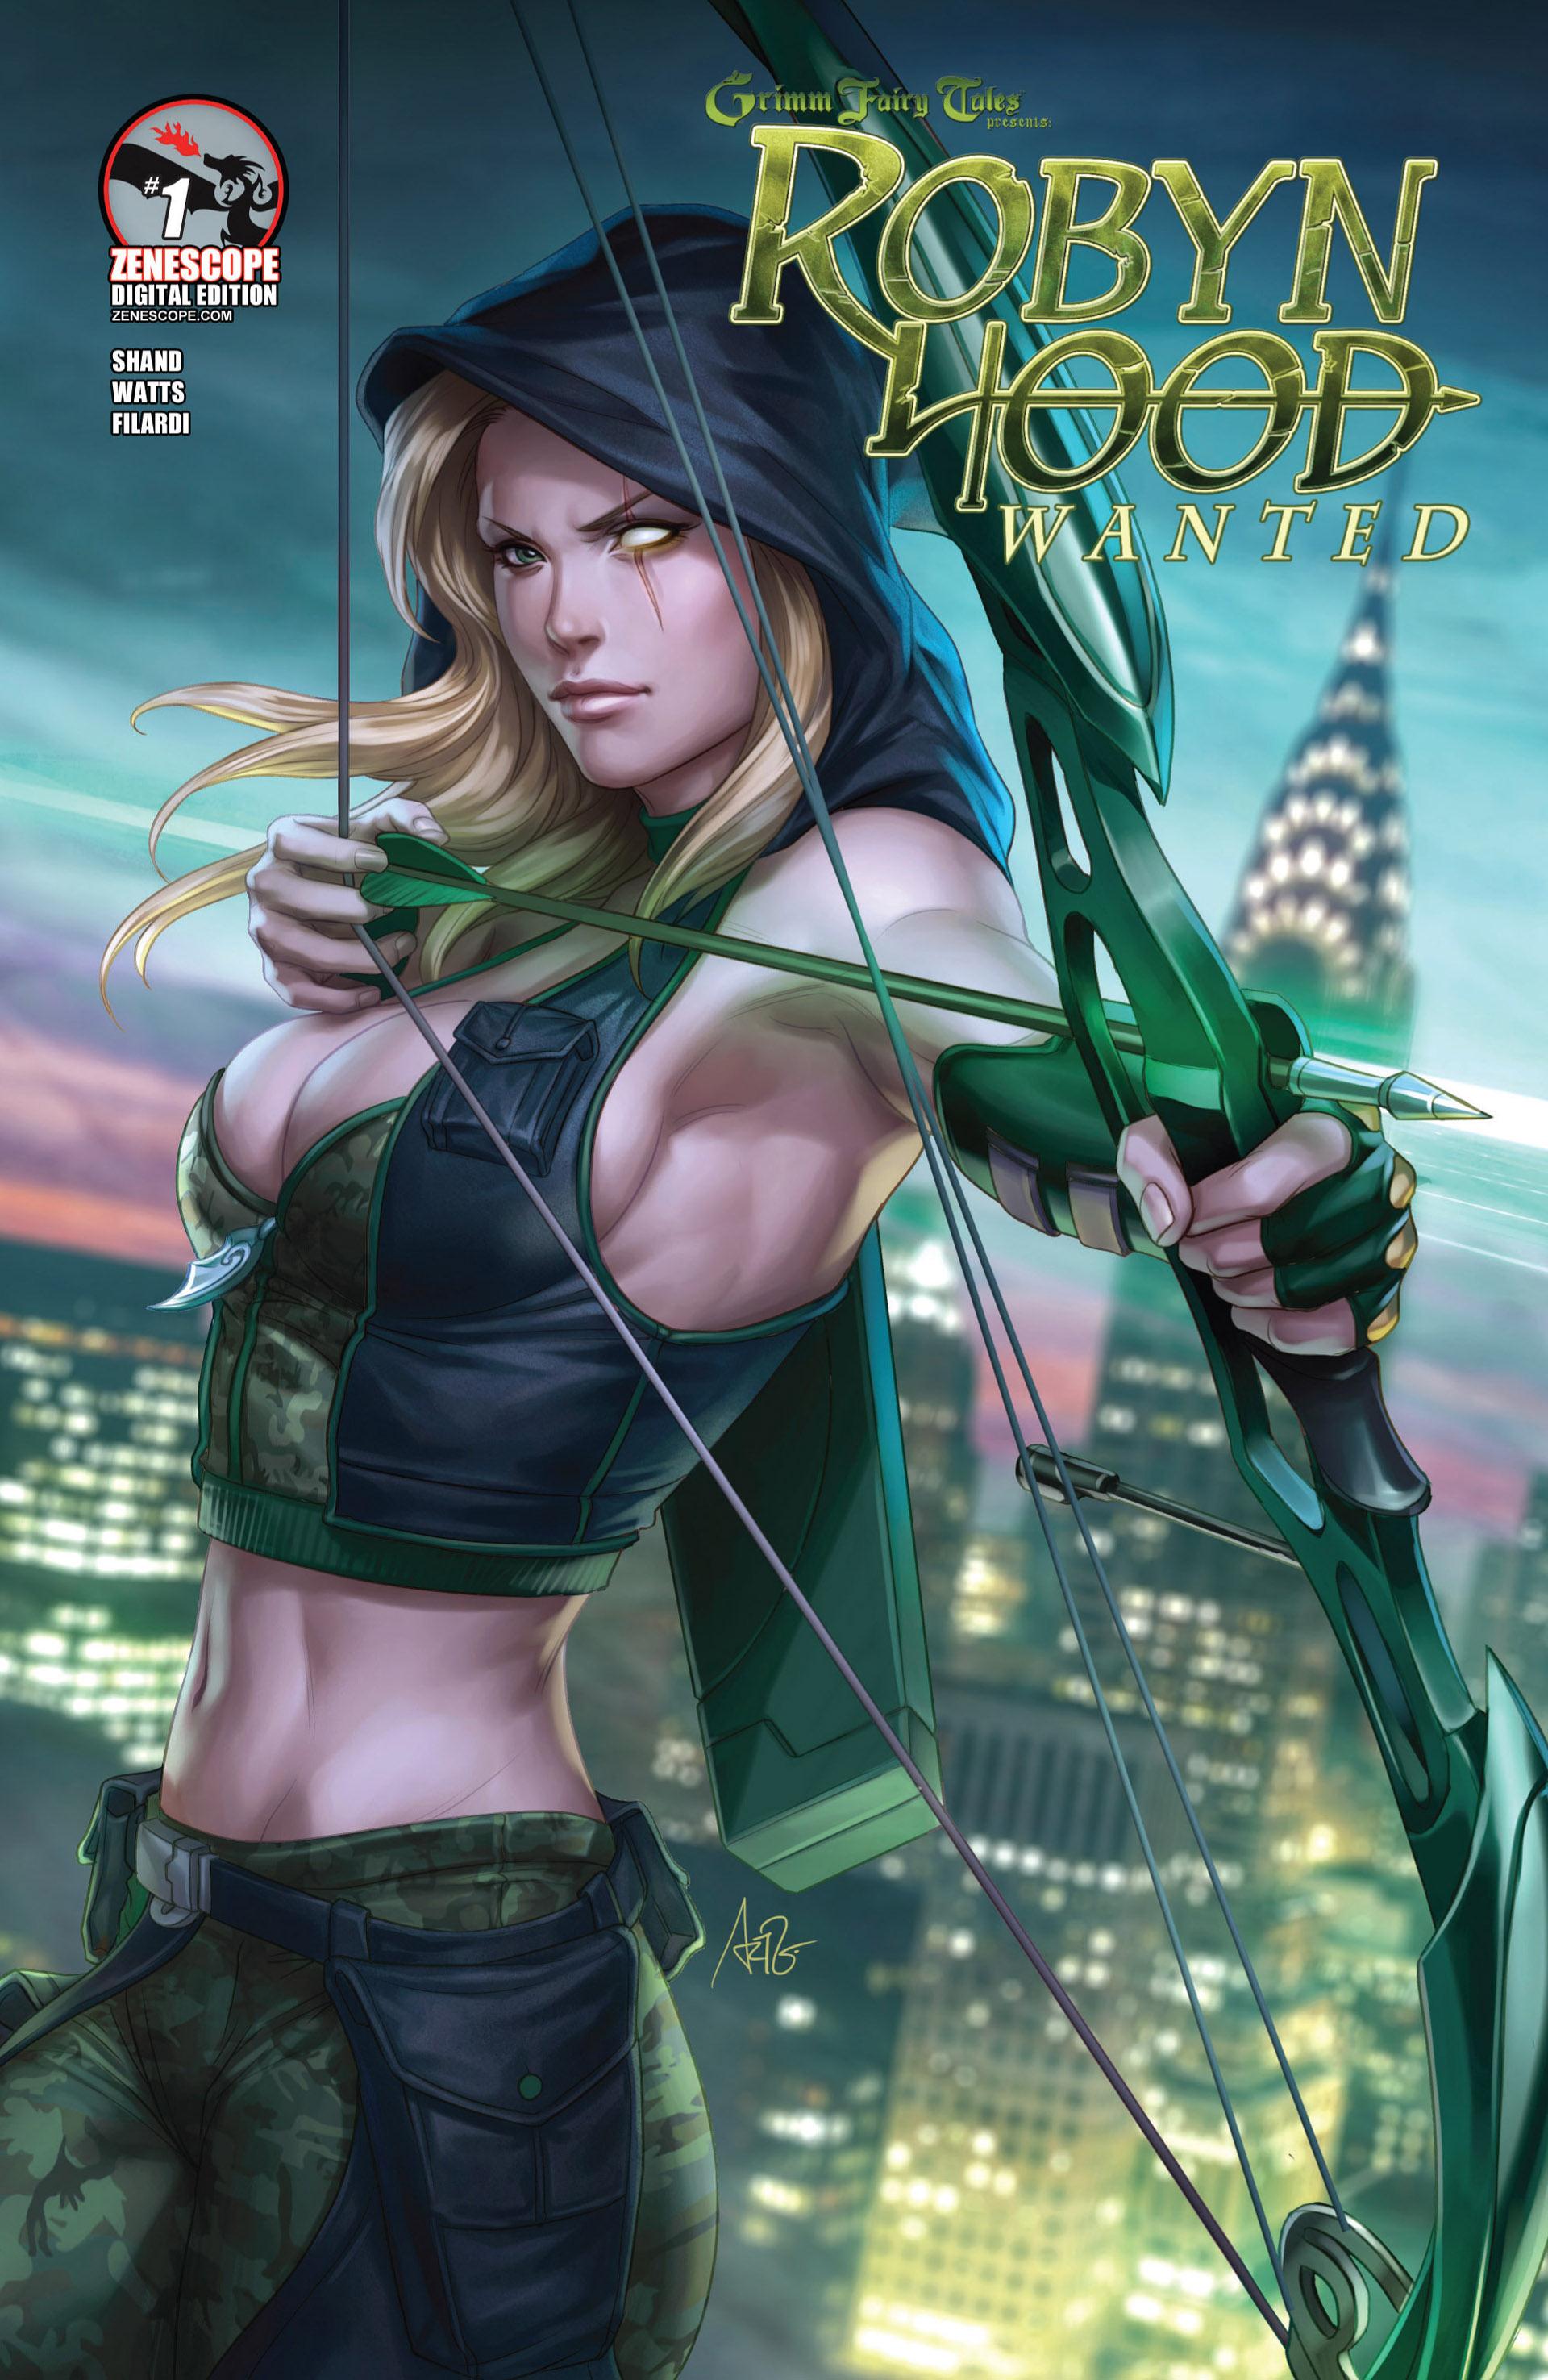 GFT present Robyn Hood Wanted